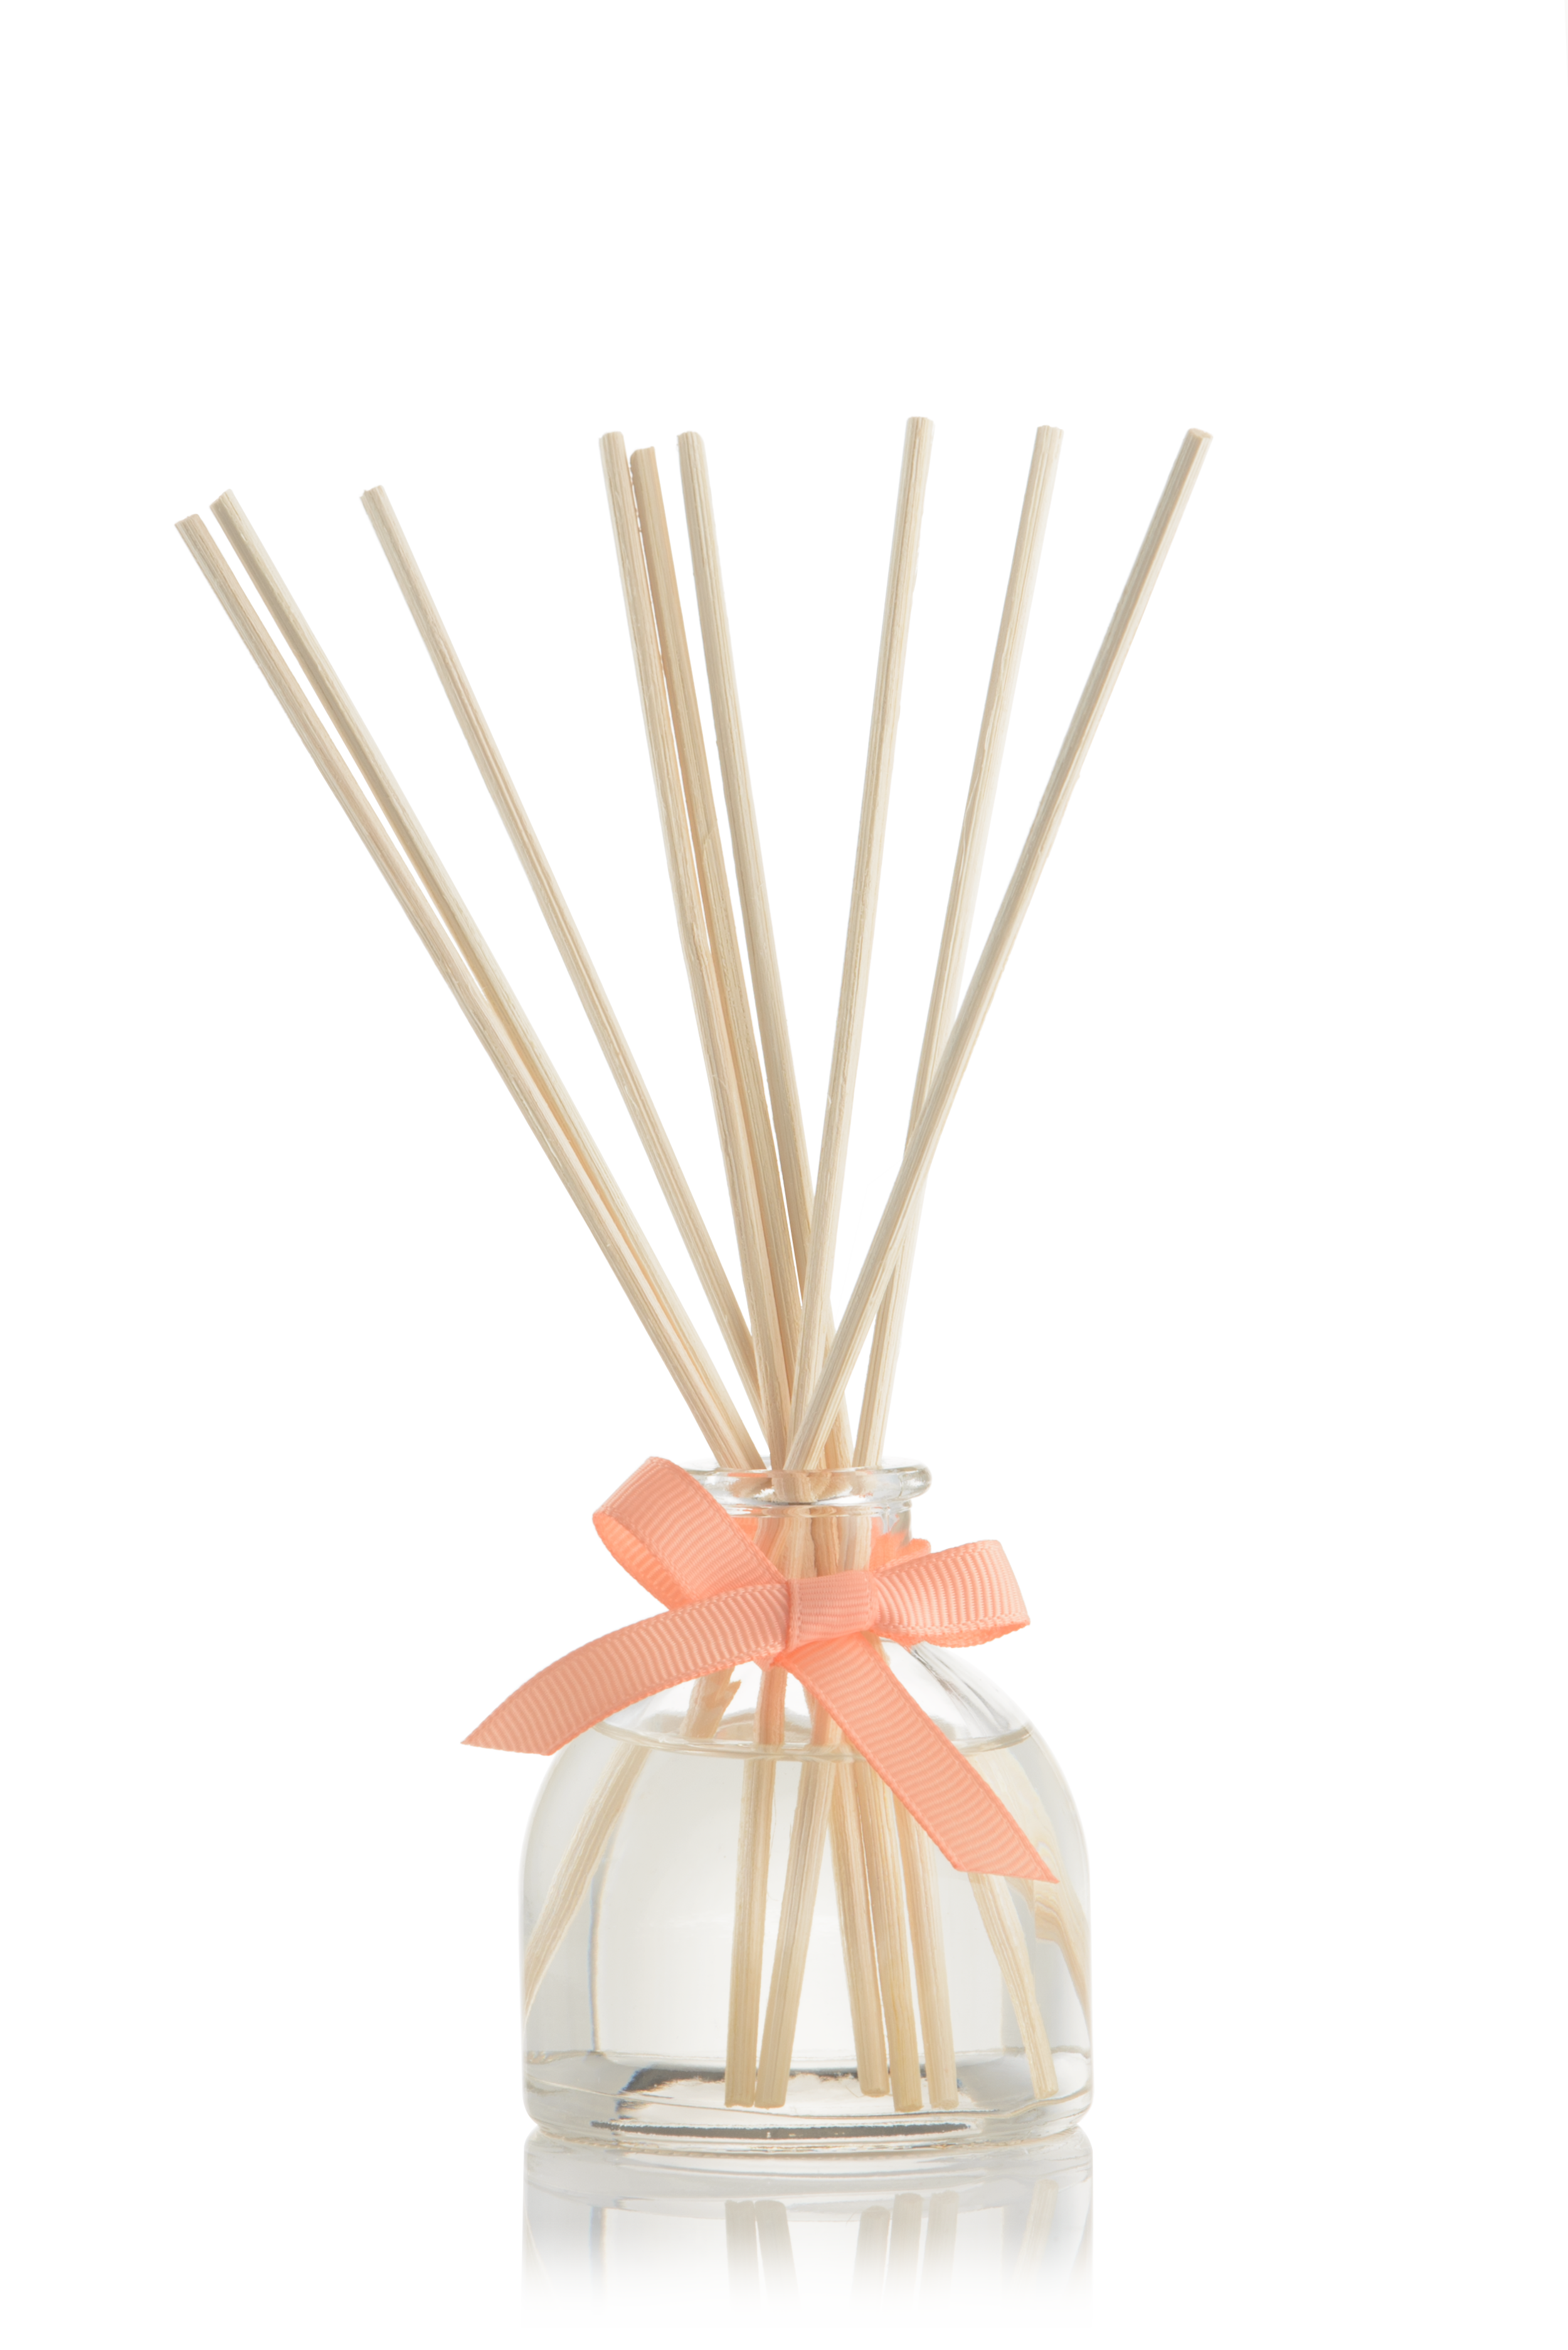 Details about   Copenhagen Candle Company CHRISTMAS FIR Fragranced REED DIFFUSER Iridescence 